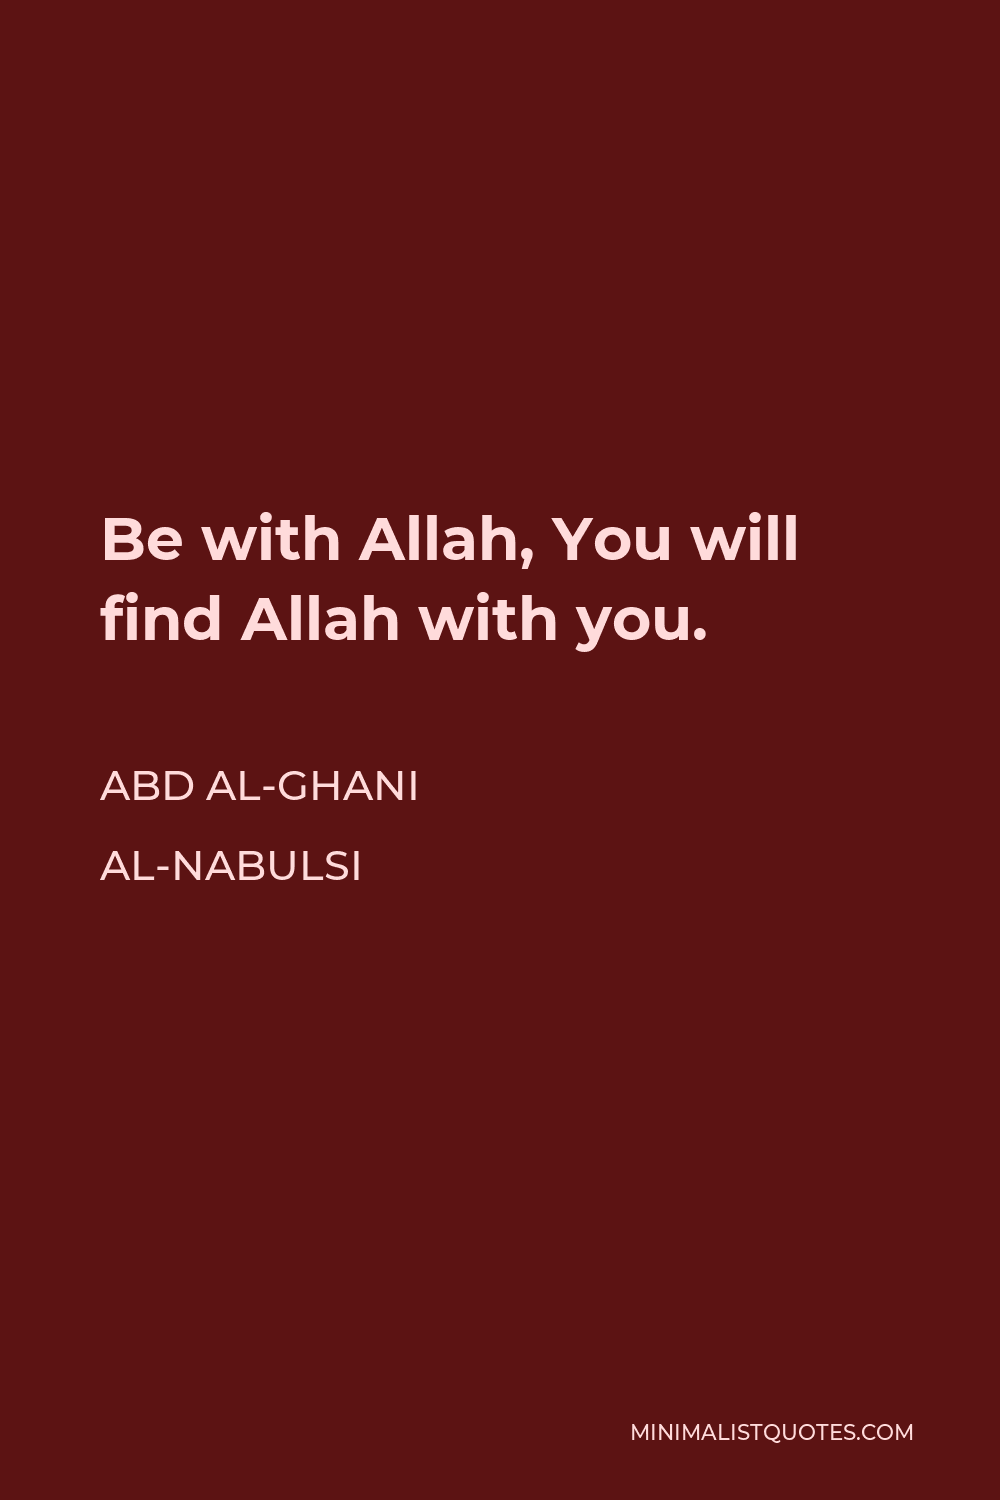 Abd al-Ghani al-Nabulsi Quote - Be with Allah, You will find Allah with you.